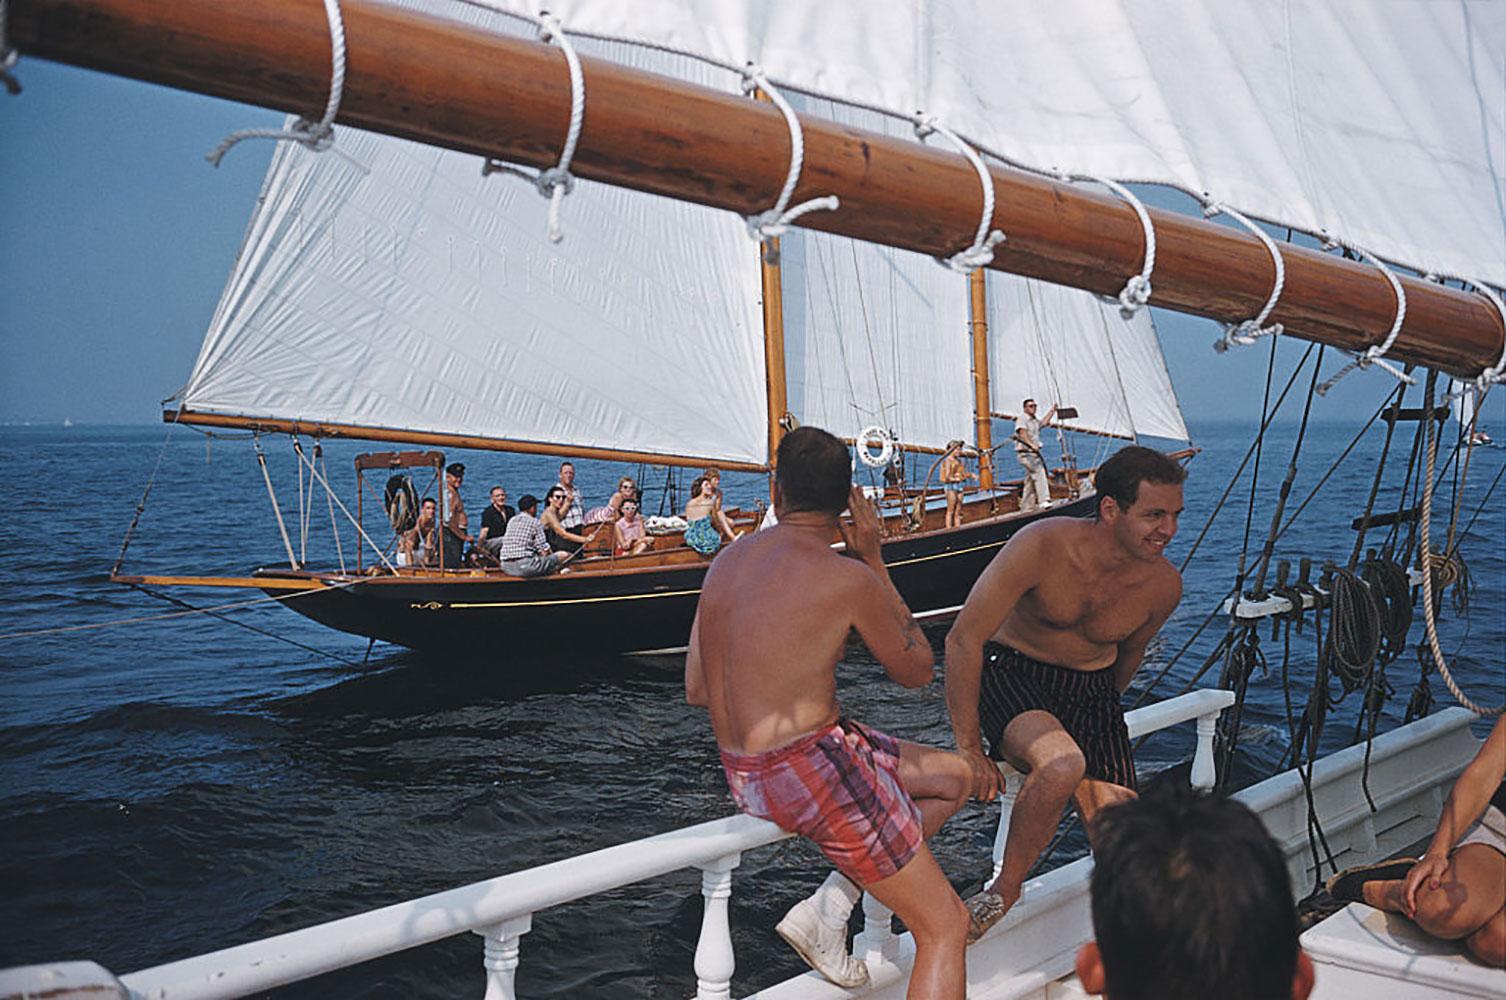 Holiday In Boston
1975
Chromogenic Lambda Print
Estate edition of 150

A sailing holiday on Barclay (Buzzy) H. Warburton III's brigantine 'Black Pearl', 1959. They are sailing off North Shore, Boston, around Manchester and Marblehead harbors, Essex